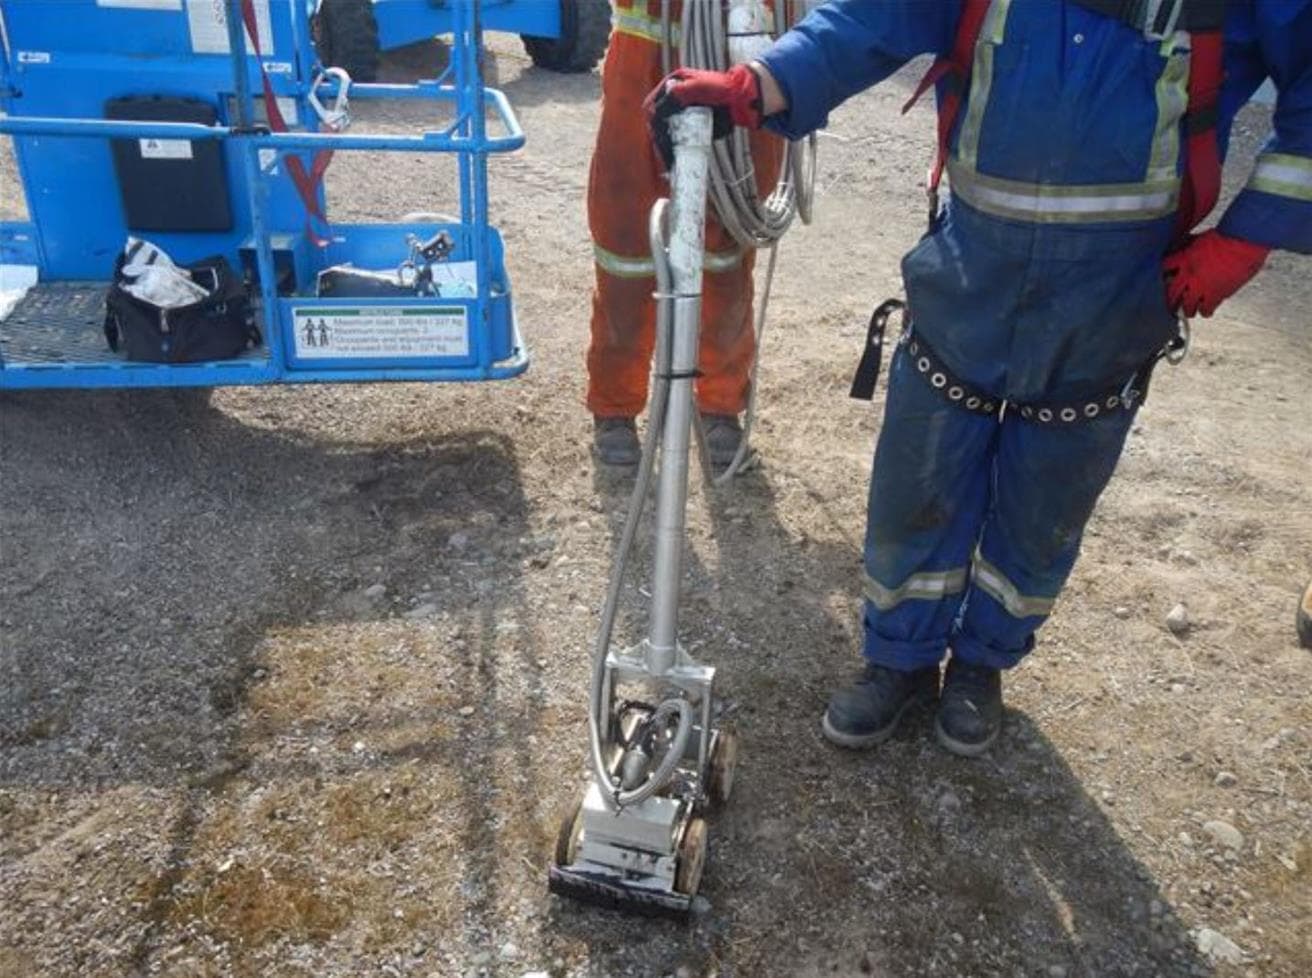 worker in full personal protective equipment holding the handle of the rimouski robot standing in a dirt path 